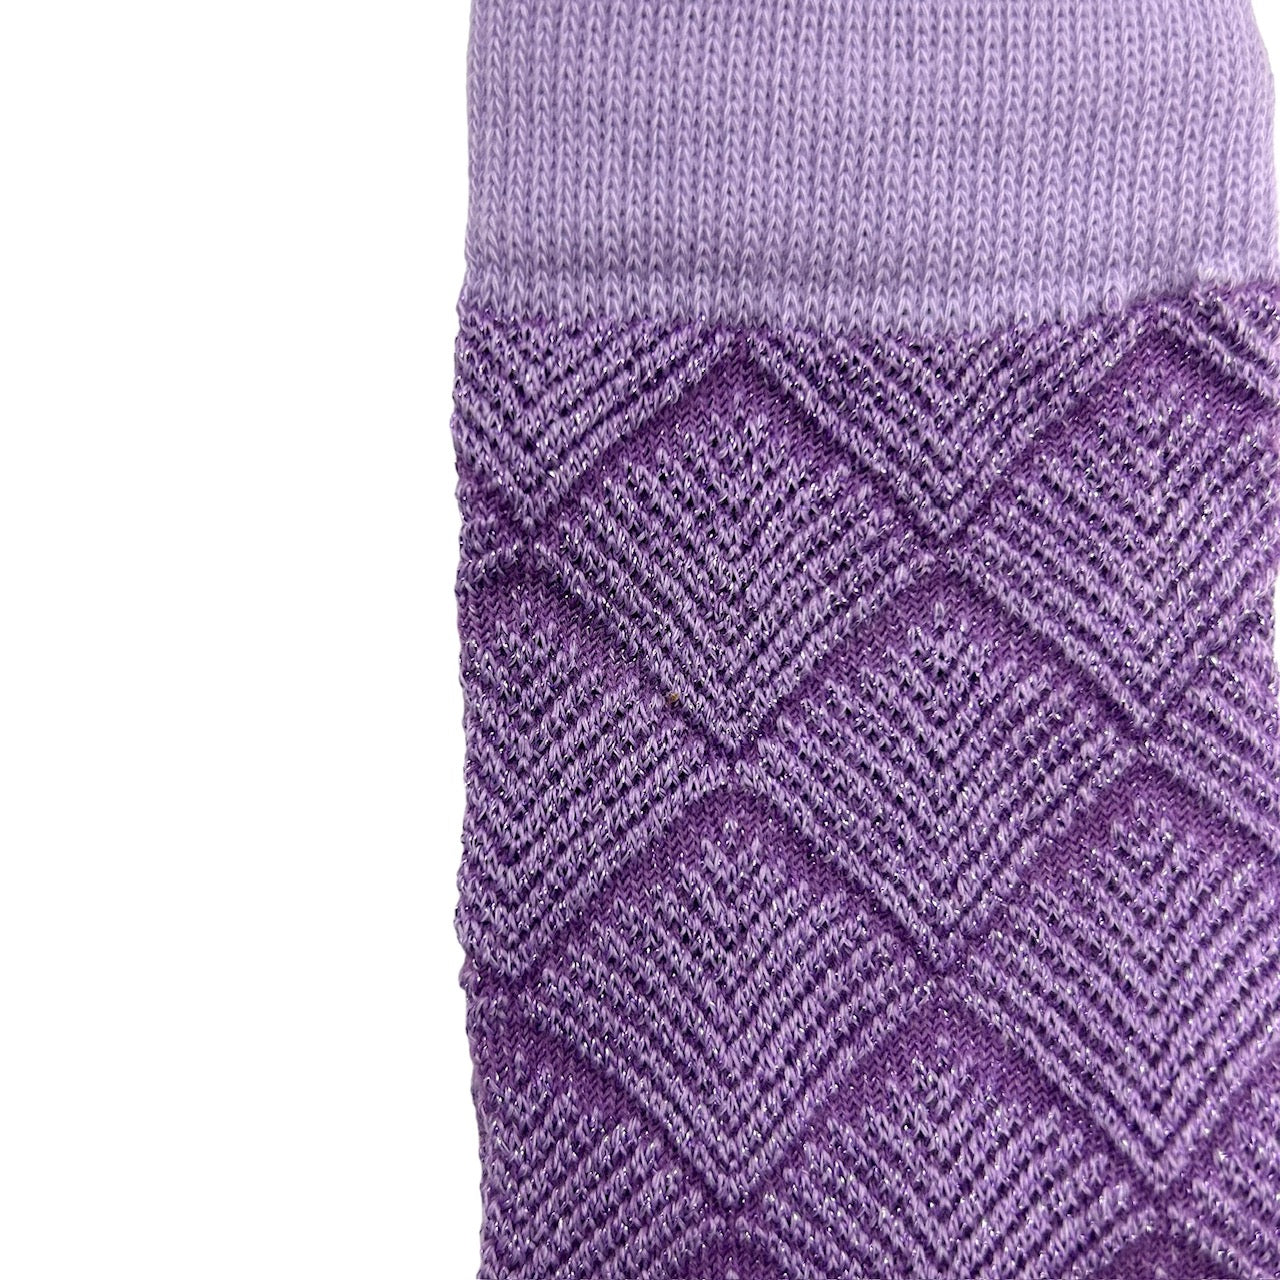 Paris socks in lilac with a pink shell